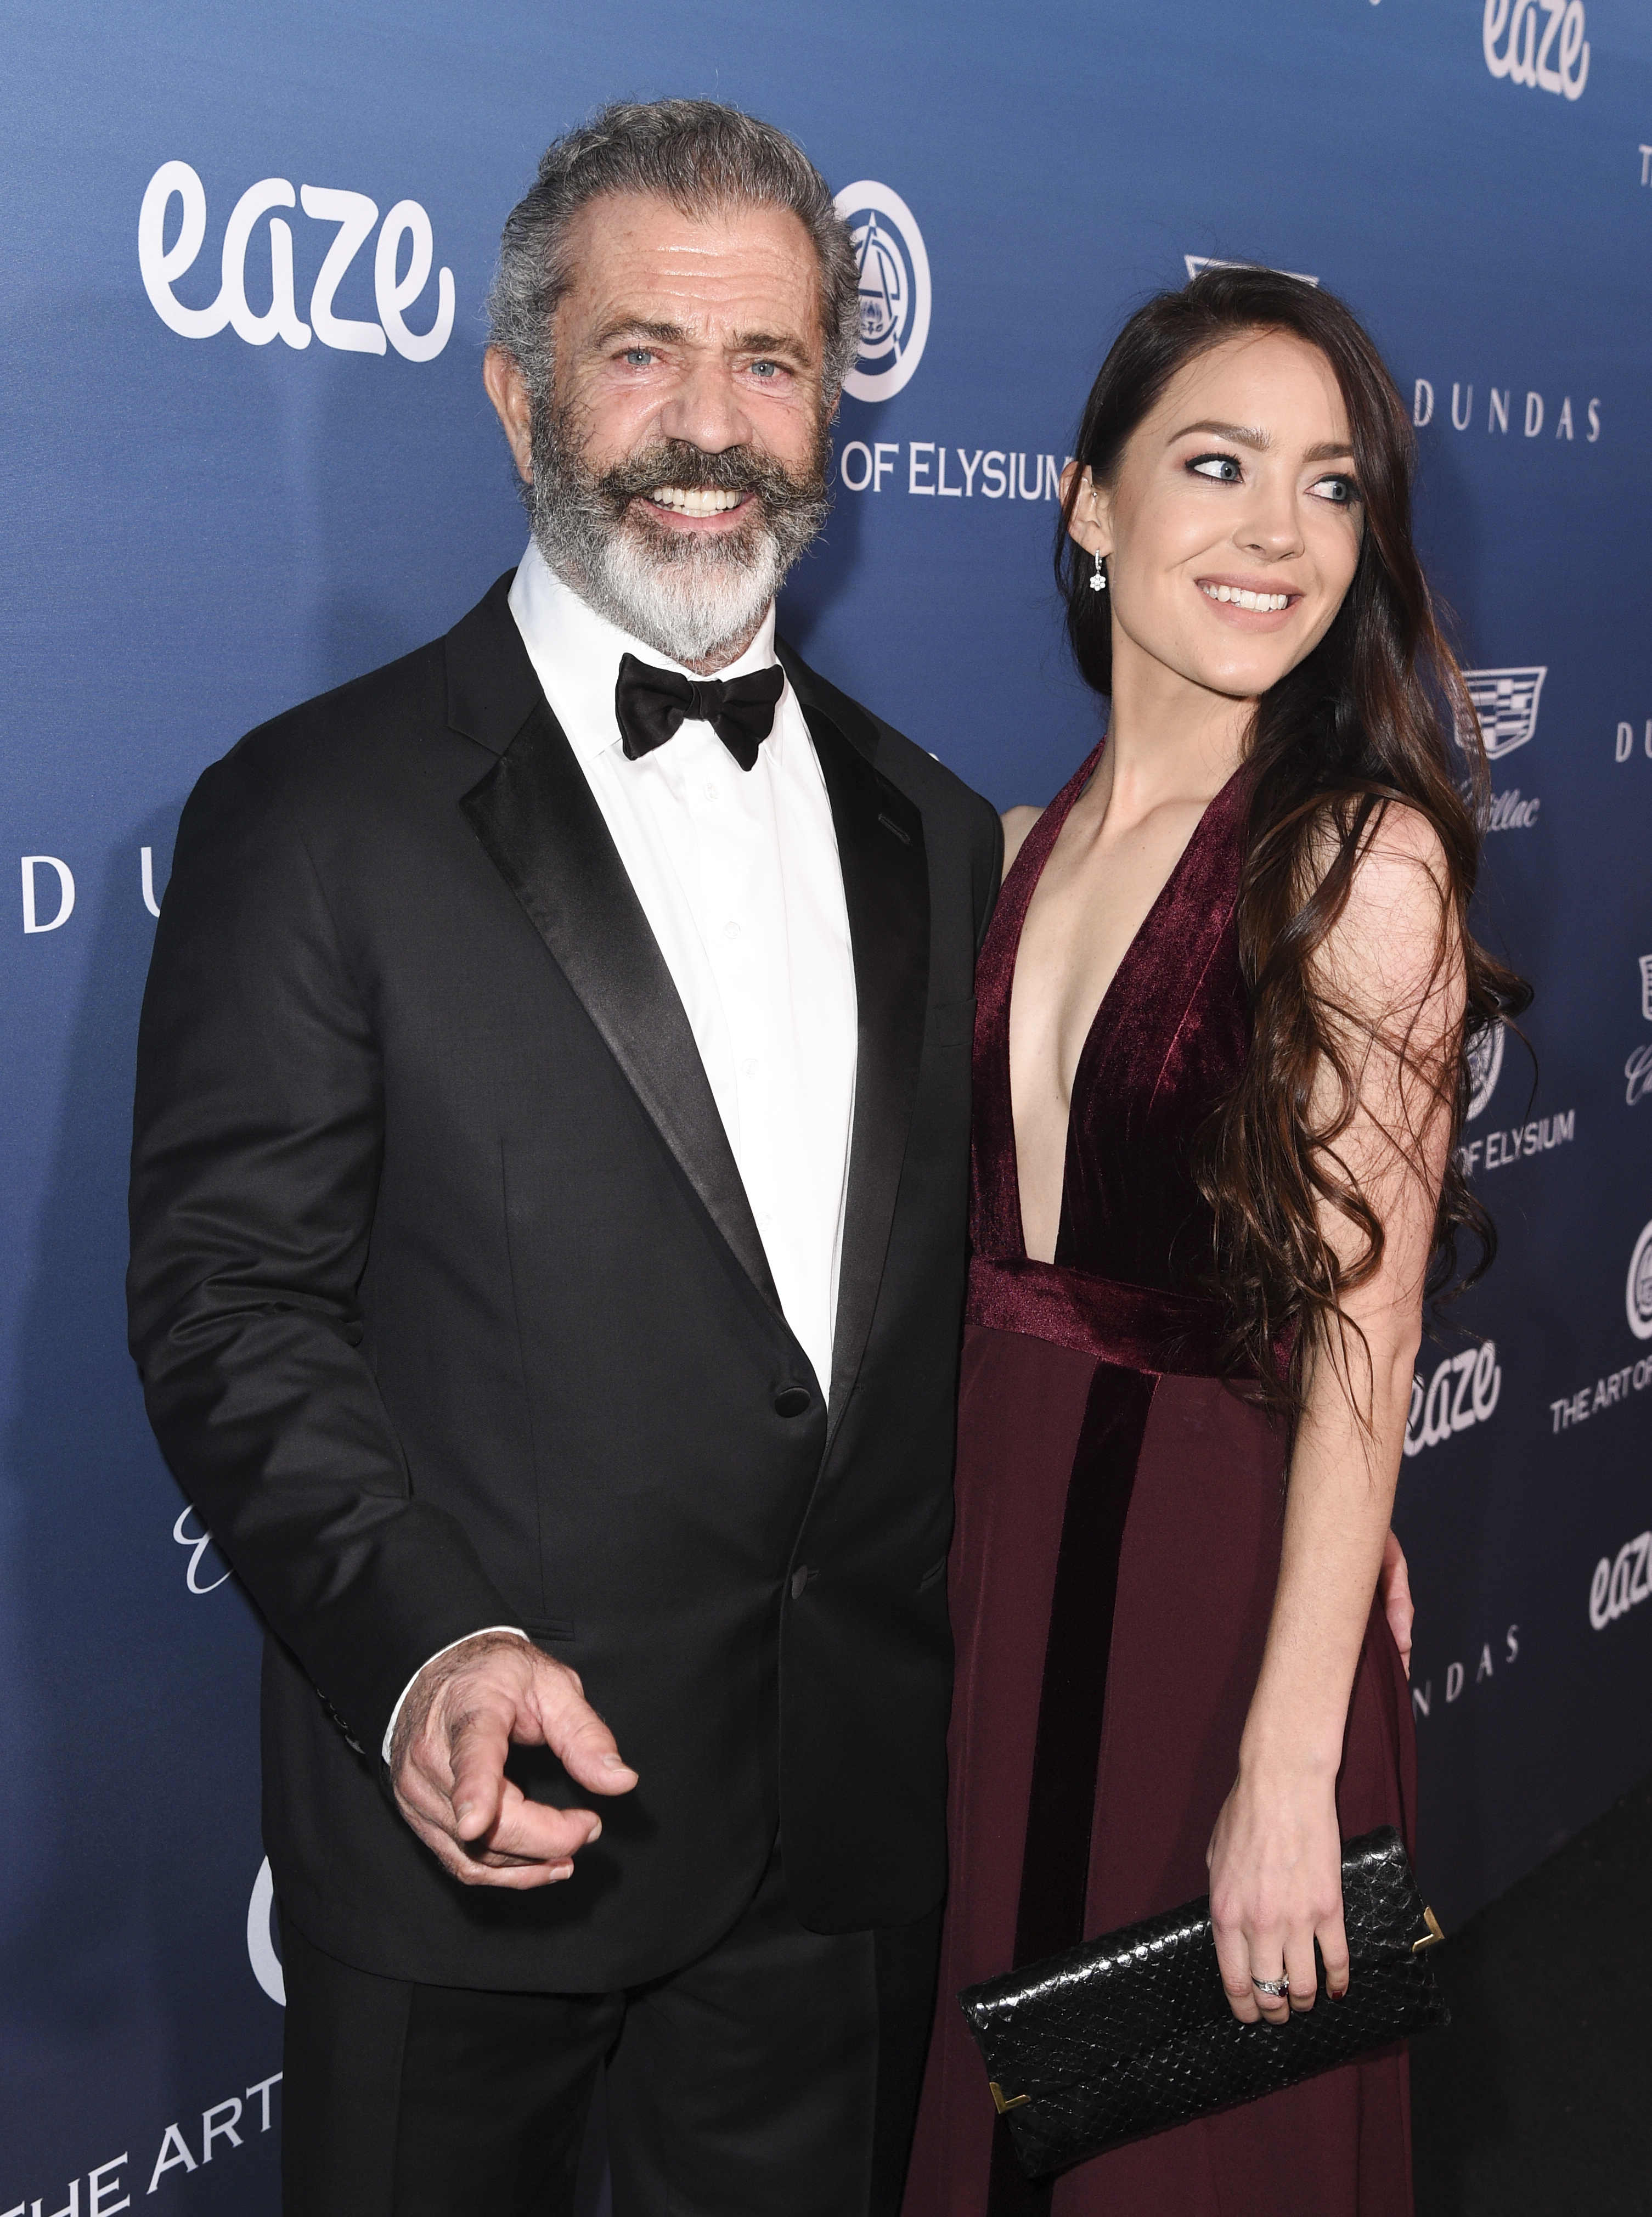 Mel Gibson and Rosalind Ross at The Art of Elysium's 12th Annual Black Tie Event 'Heaven,' in Los Angeles, on January 5, 2019. | Source: Getty Images